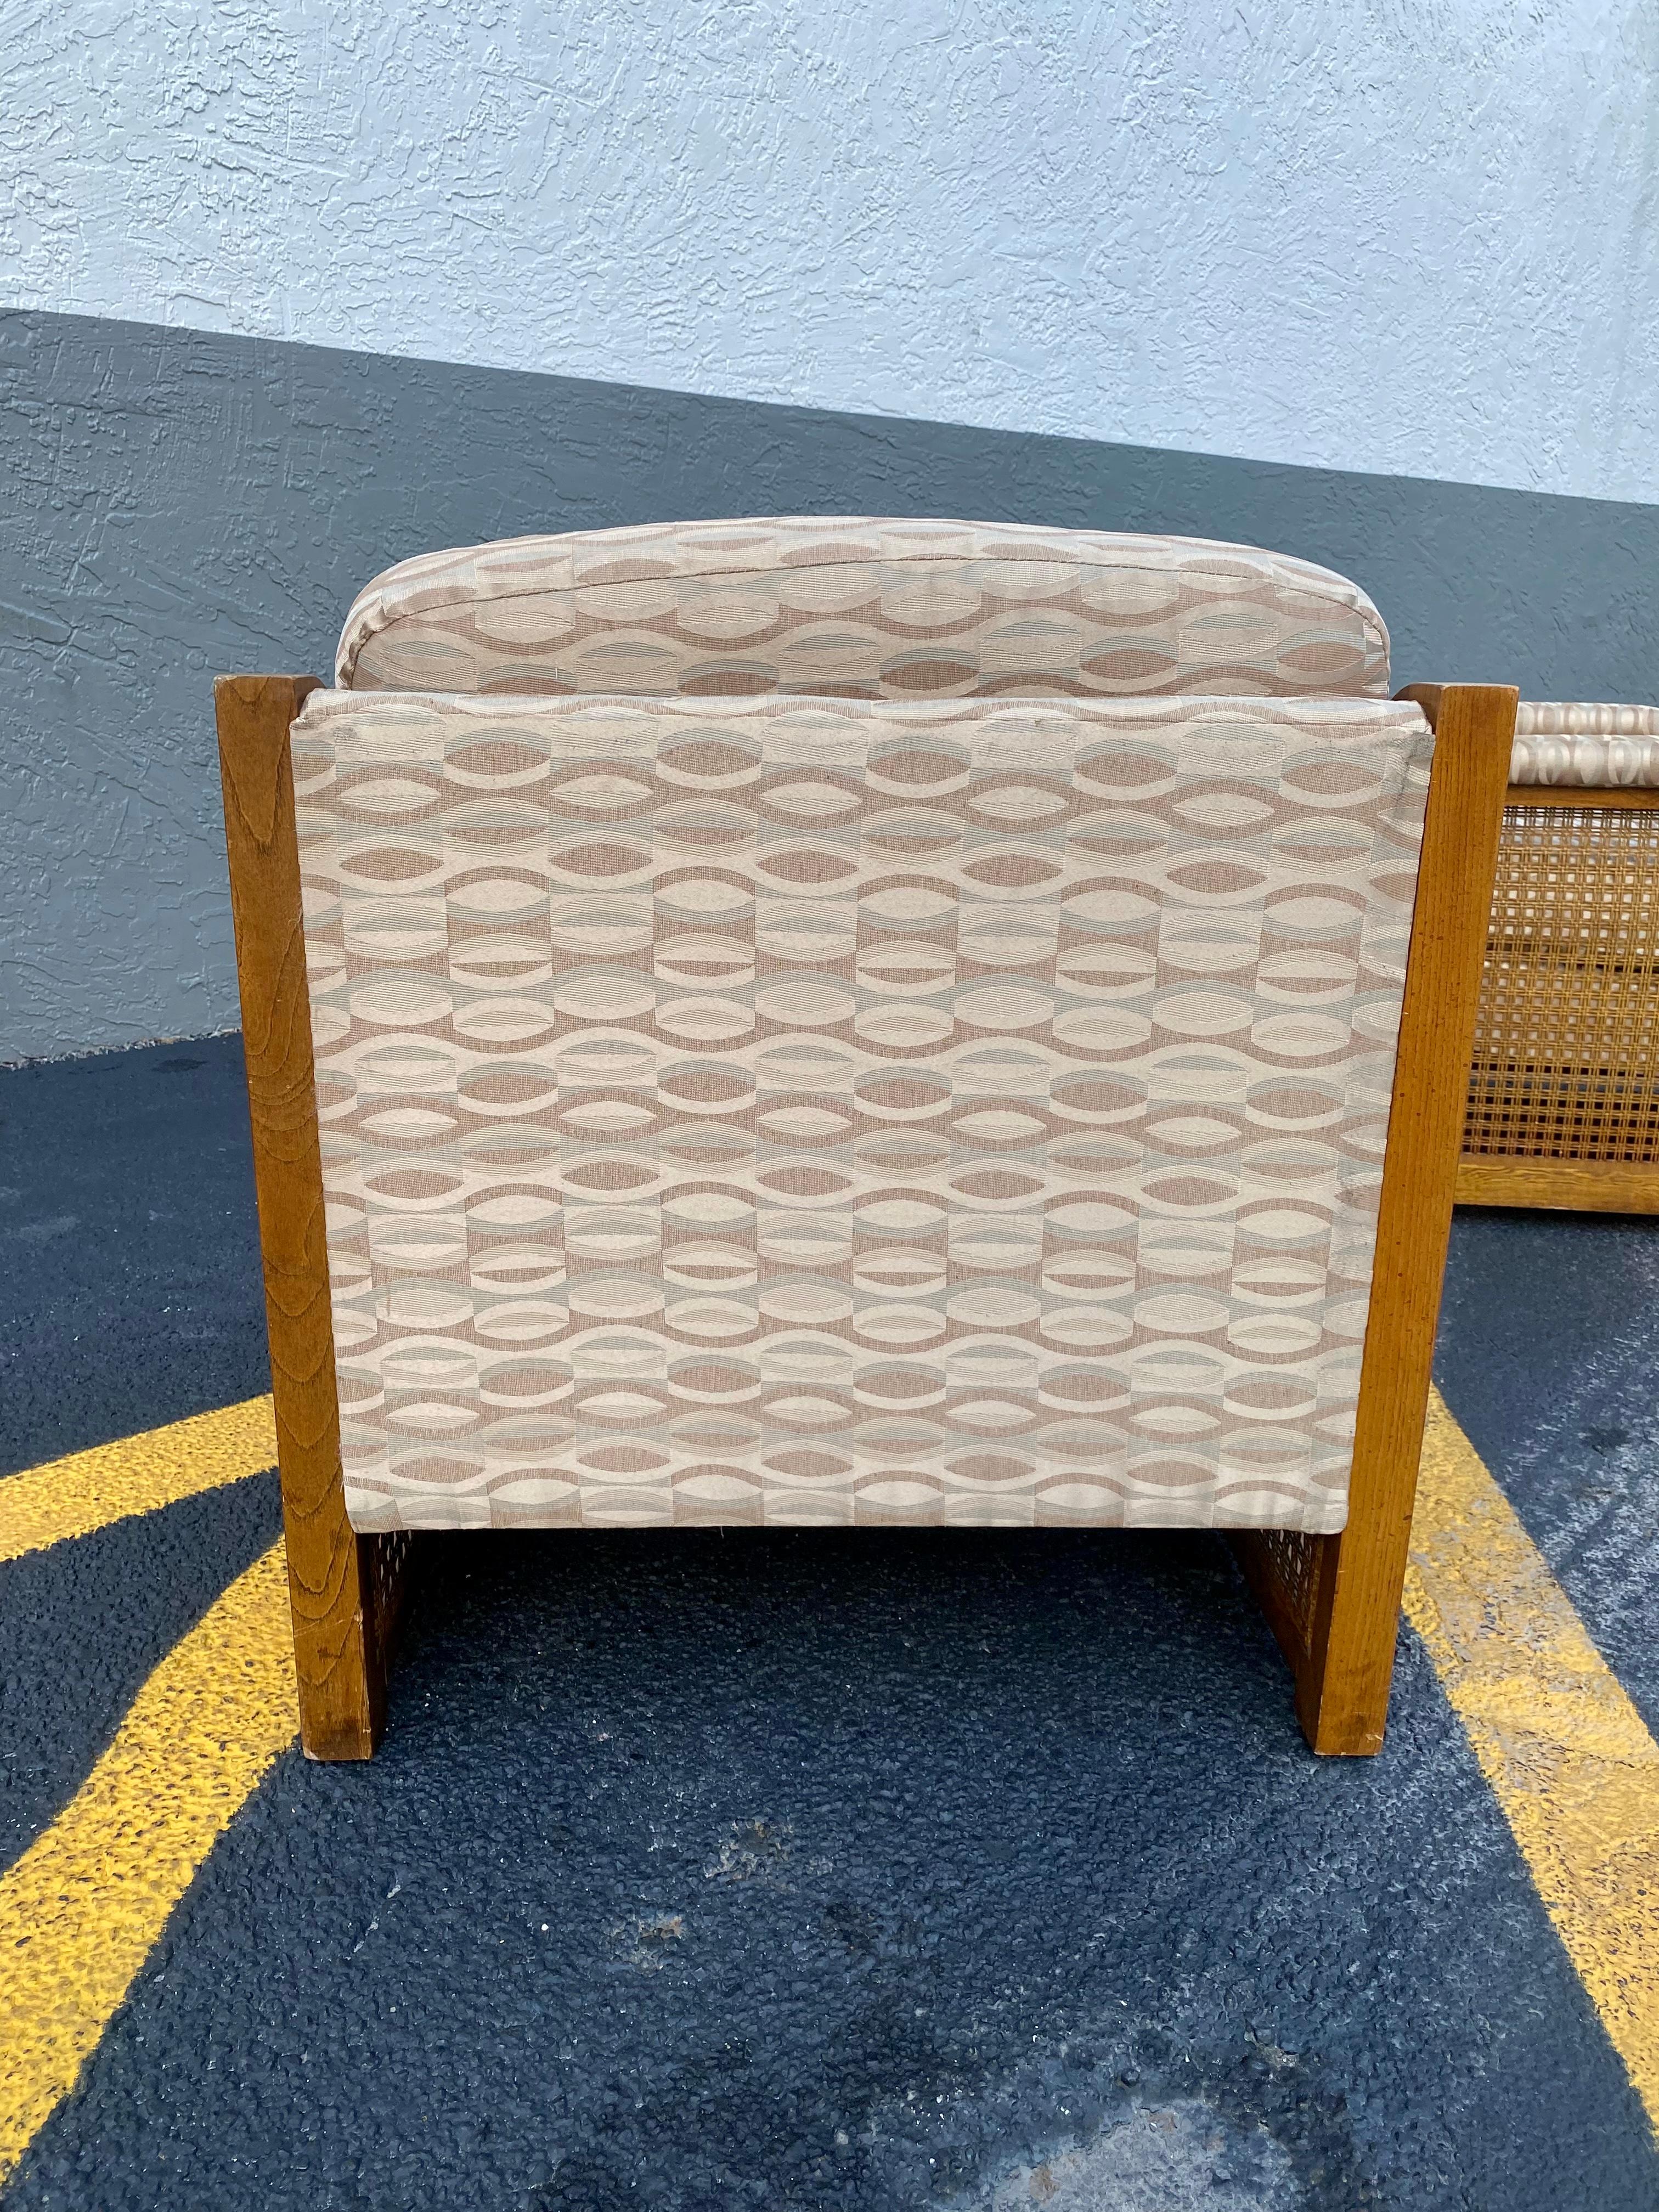 1970s Milo Baughman Rattan Caned Wood Cube Chairs, Set of 2 For Sale 4